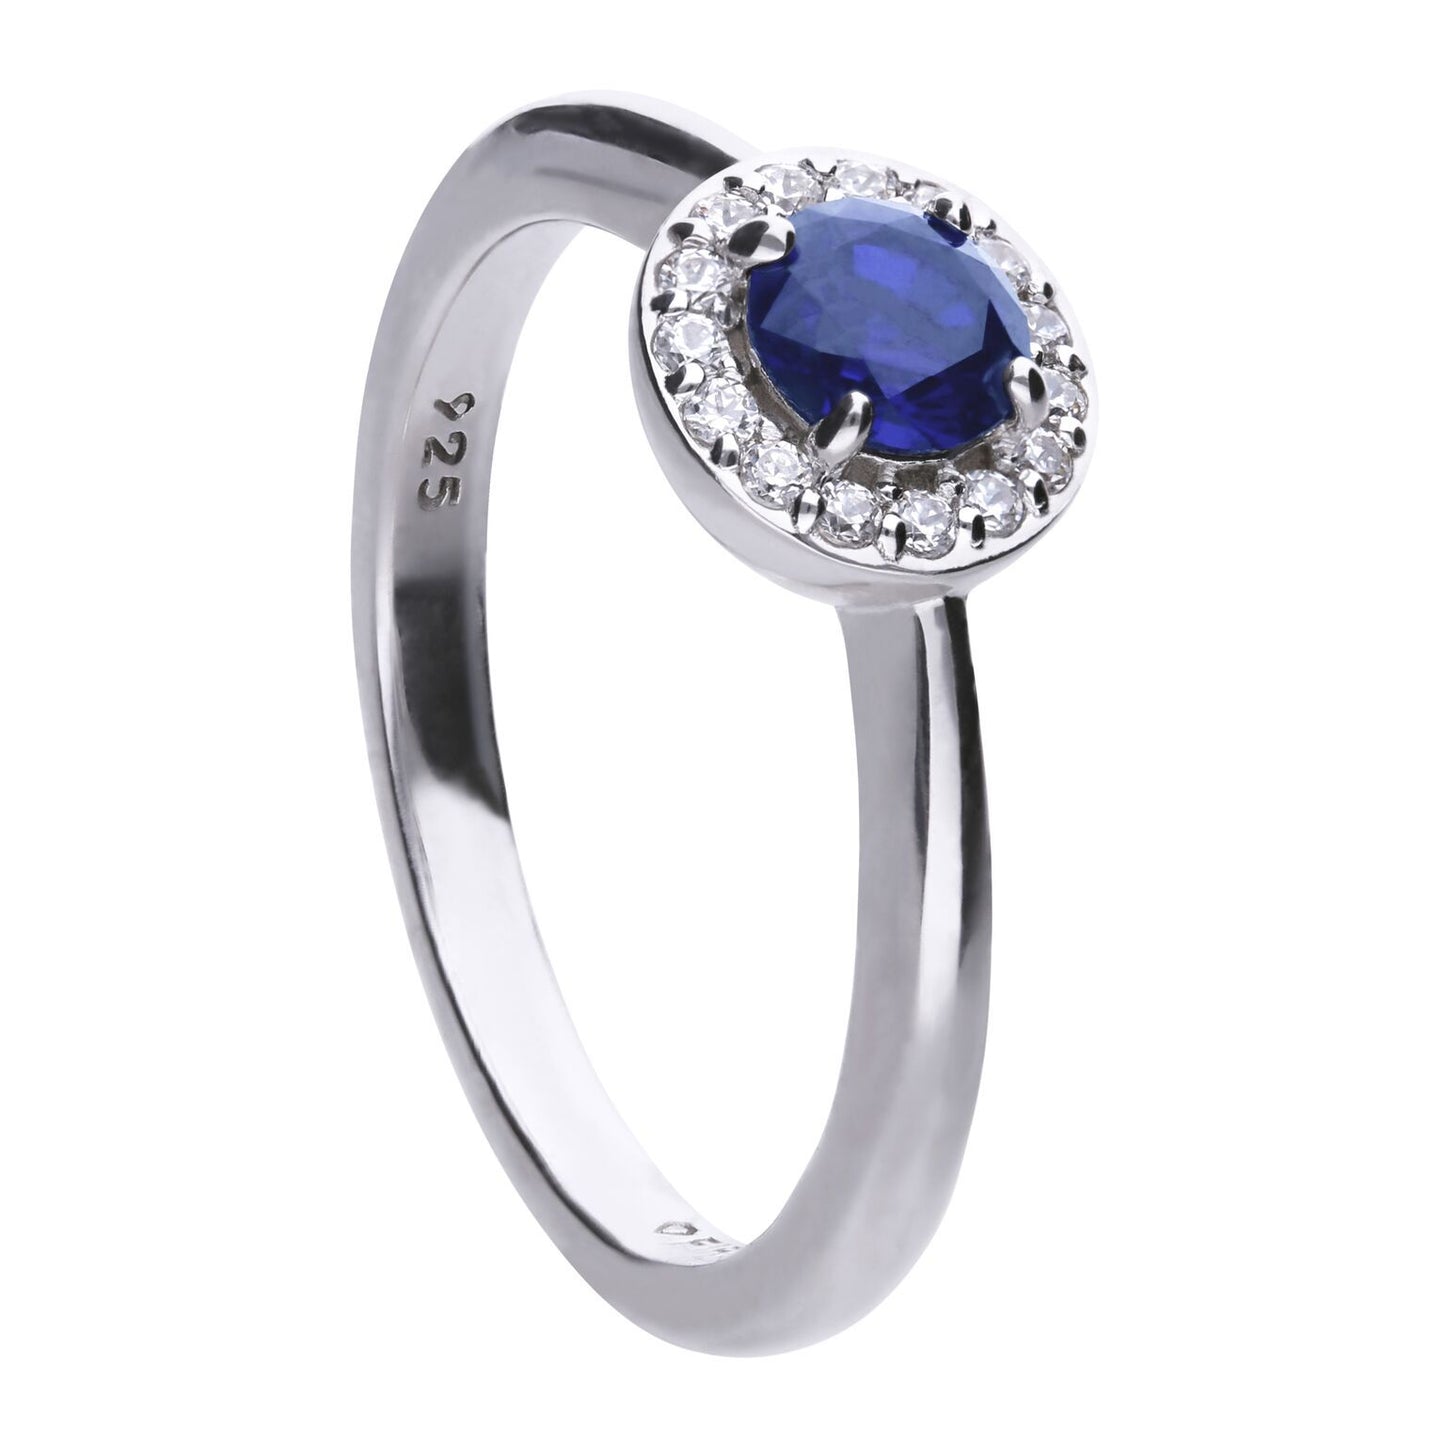 Diamonfire silver, blue and white cubic zirconia halo ring